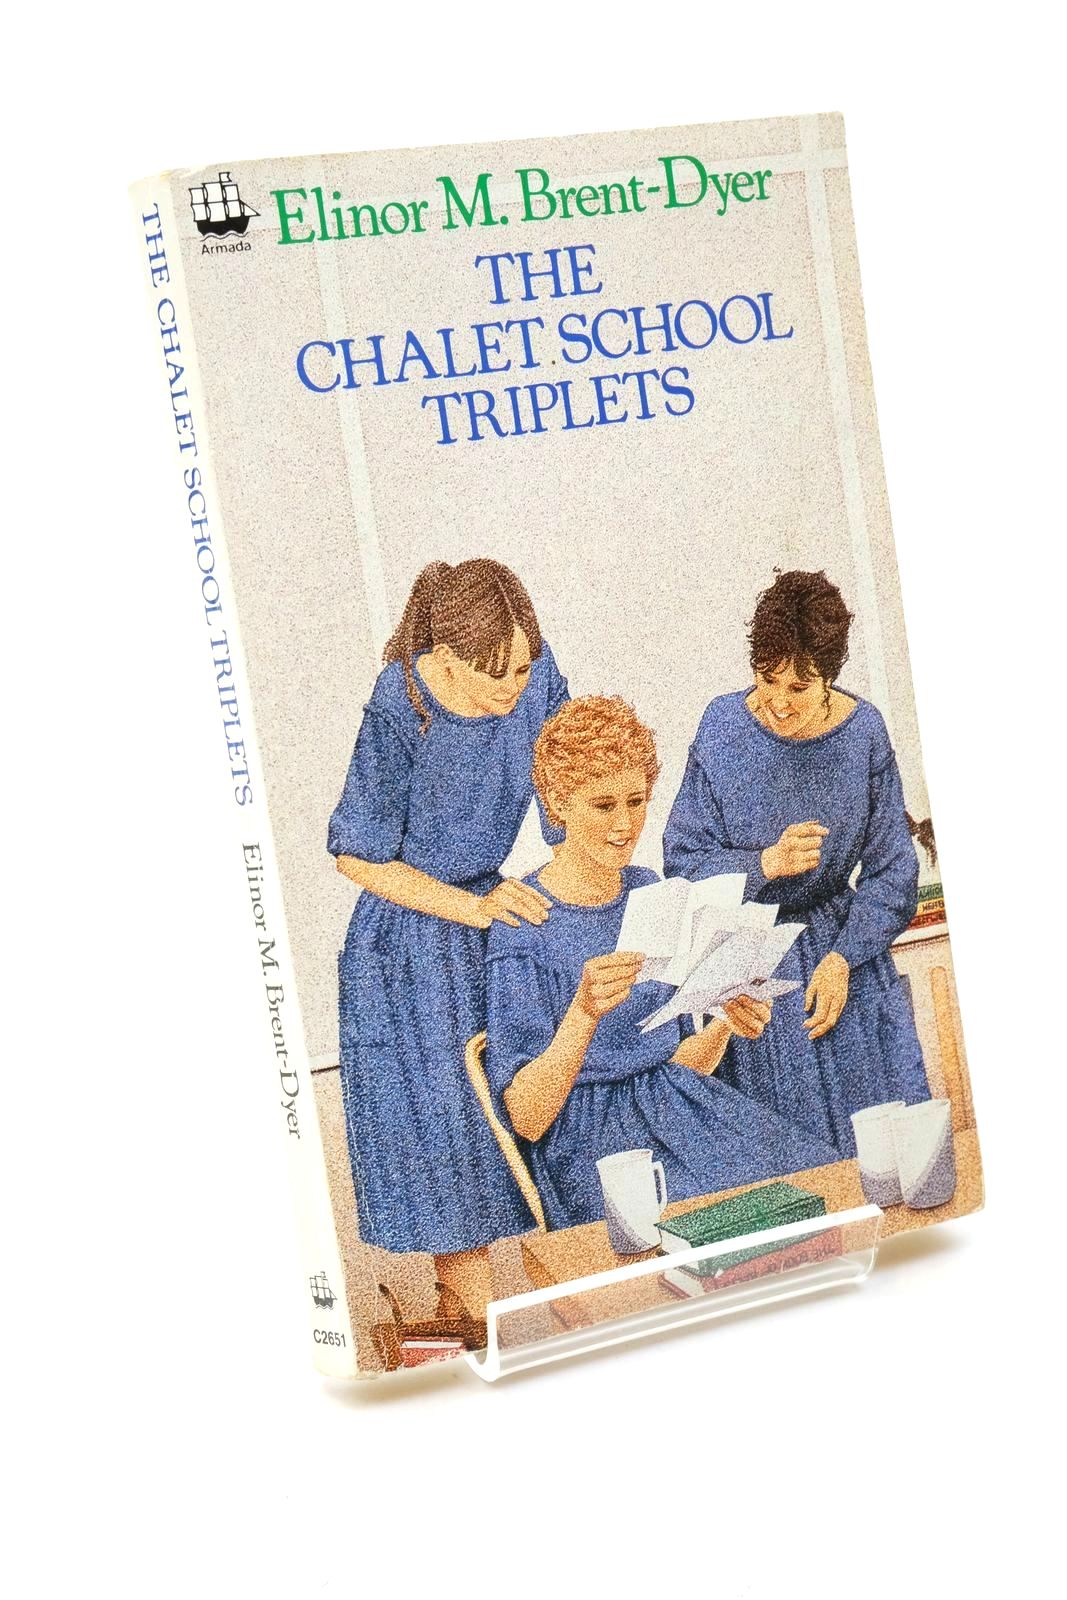 Photo of THE CHALET SCHOOL TRIPLETS- Stock Number: 1322564